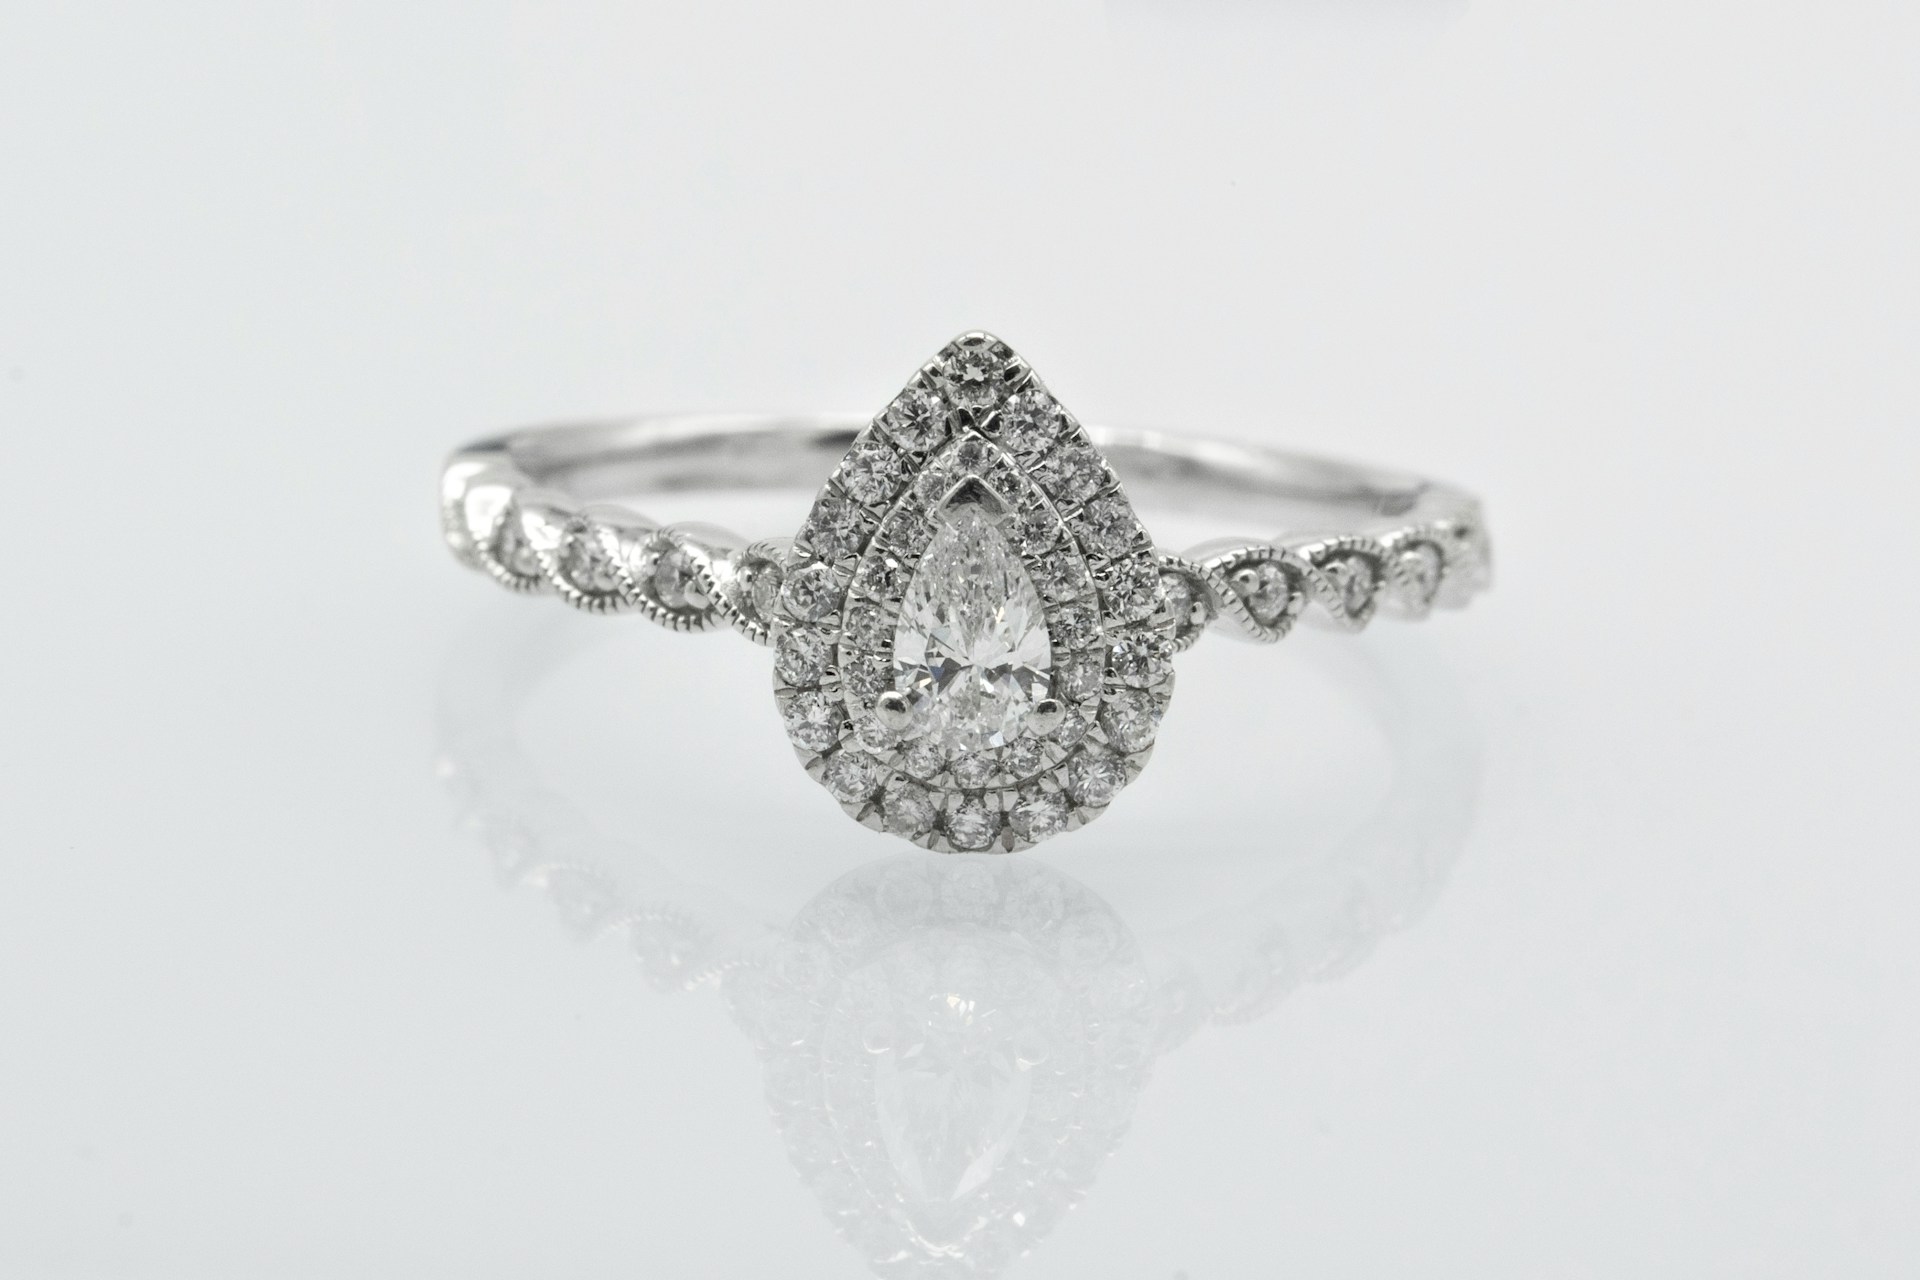 a pear shape engagement ring with a double halo, side stones, and milgrain detailing